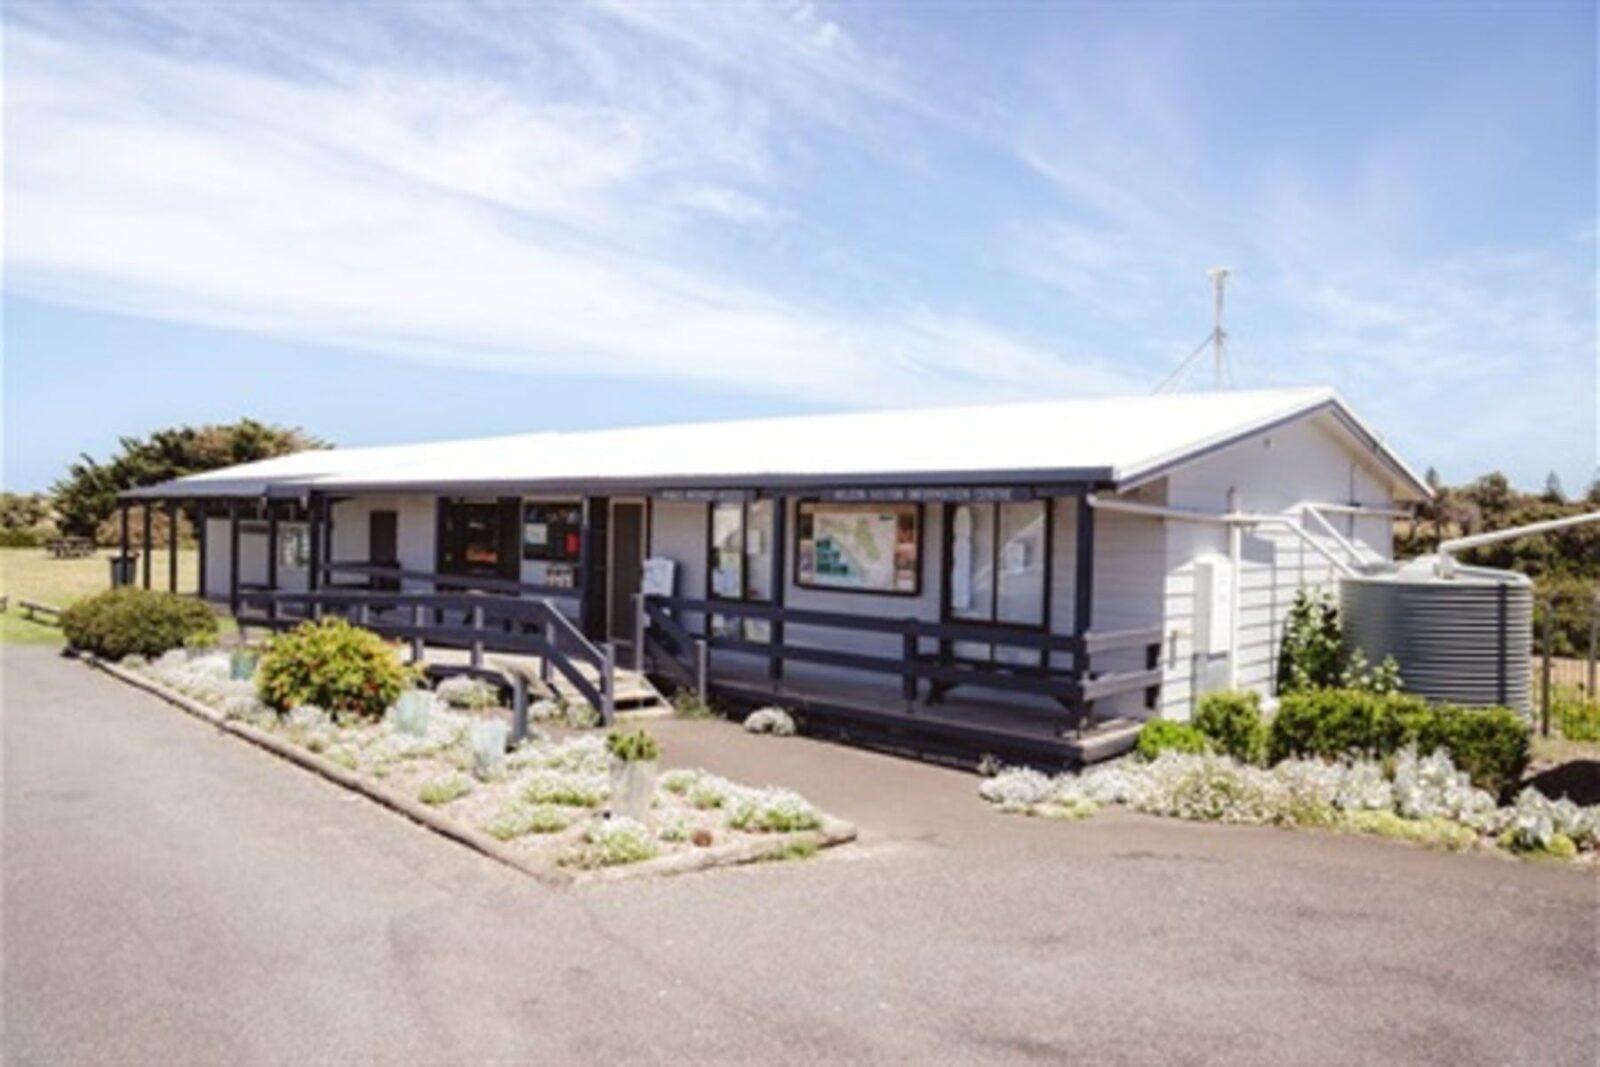 Nelson Visitor Information Centre